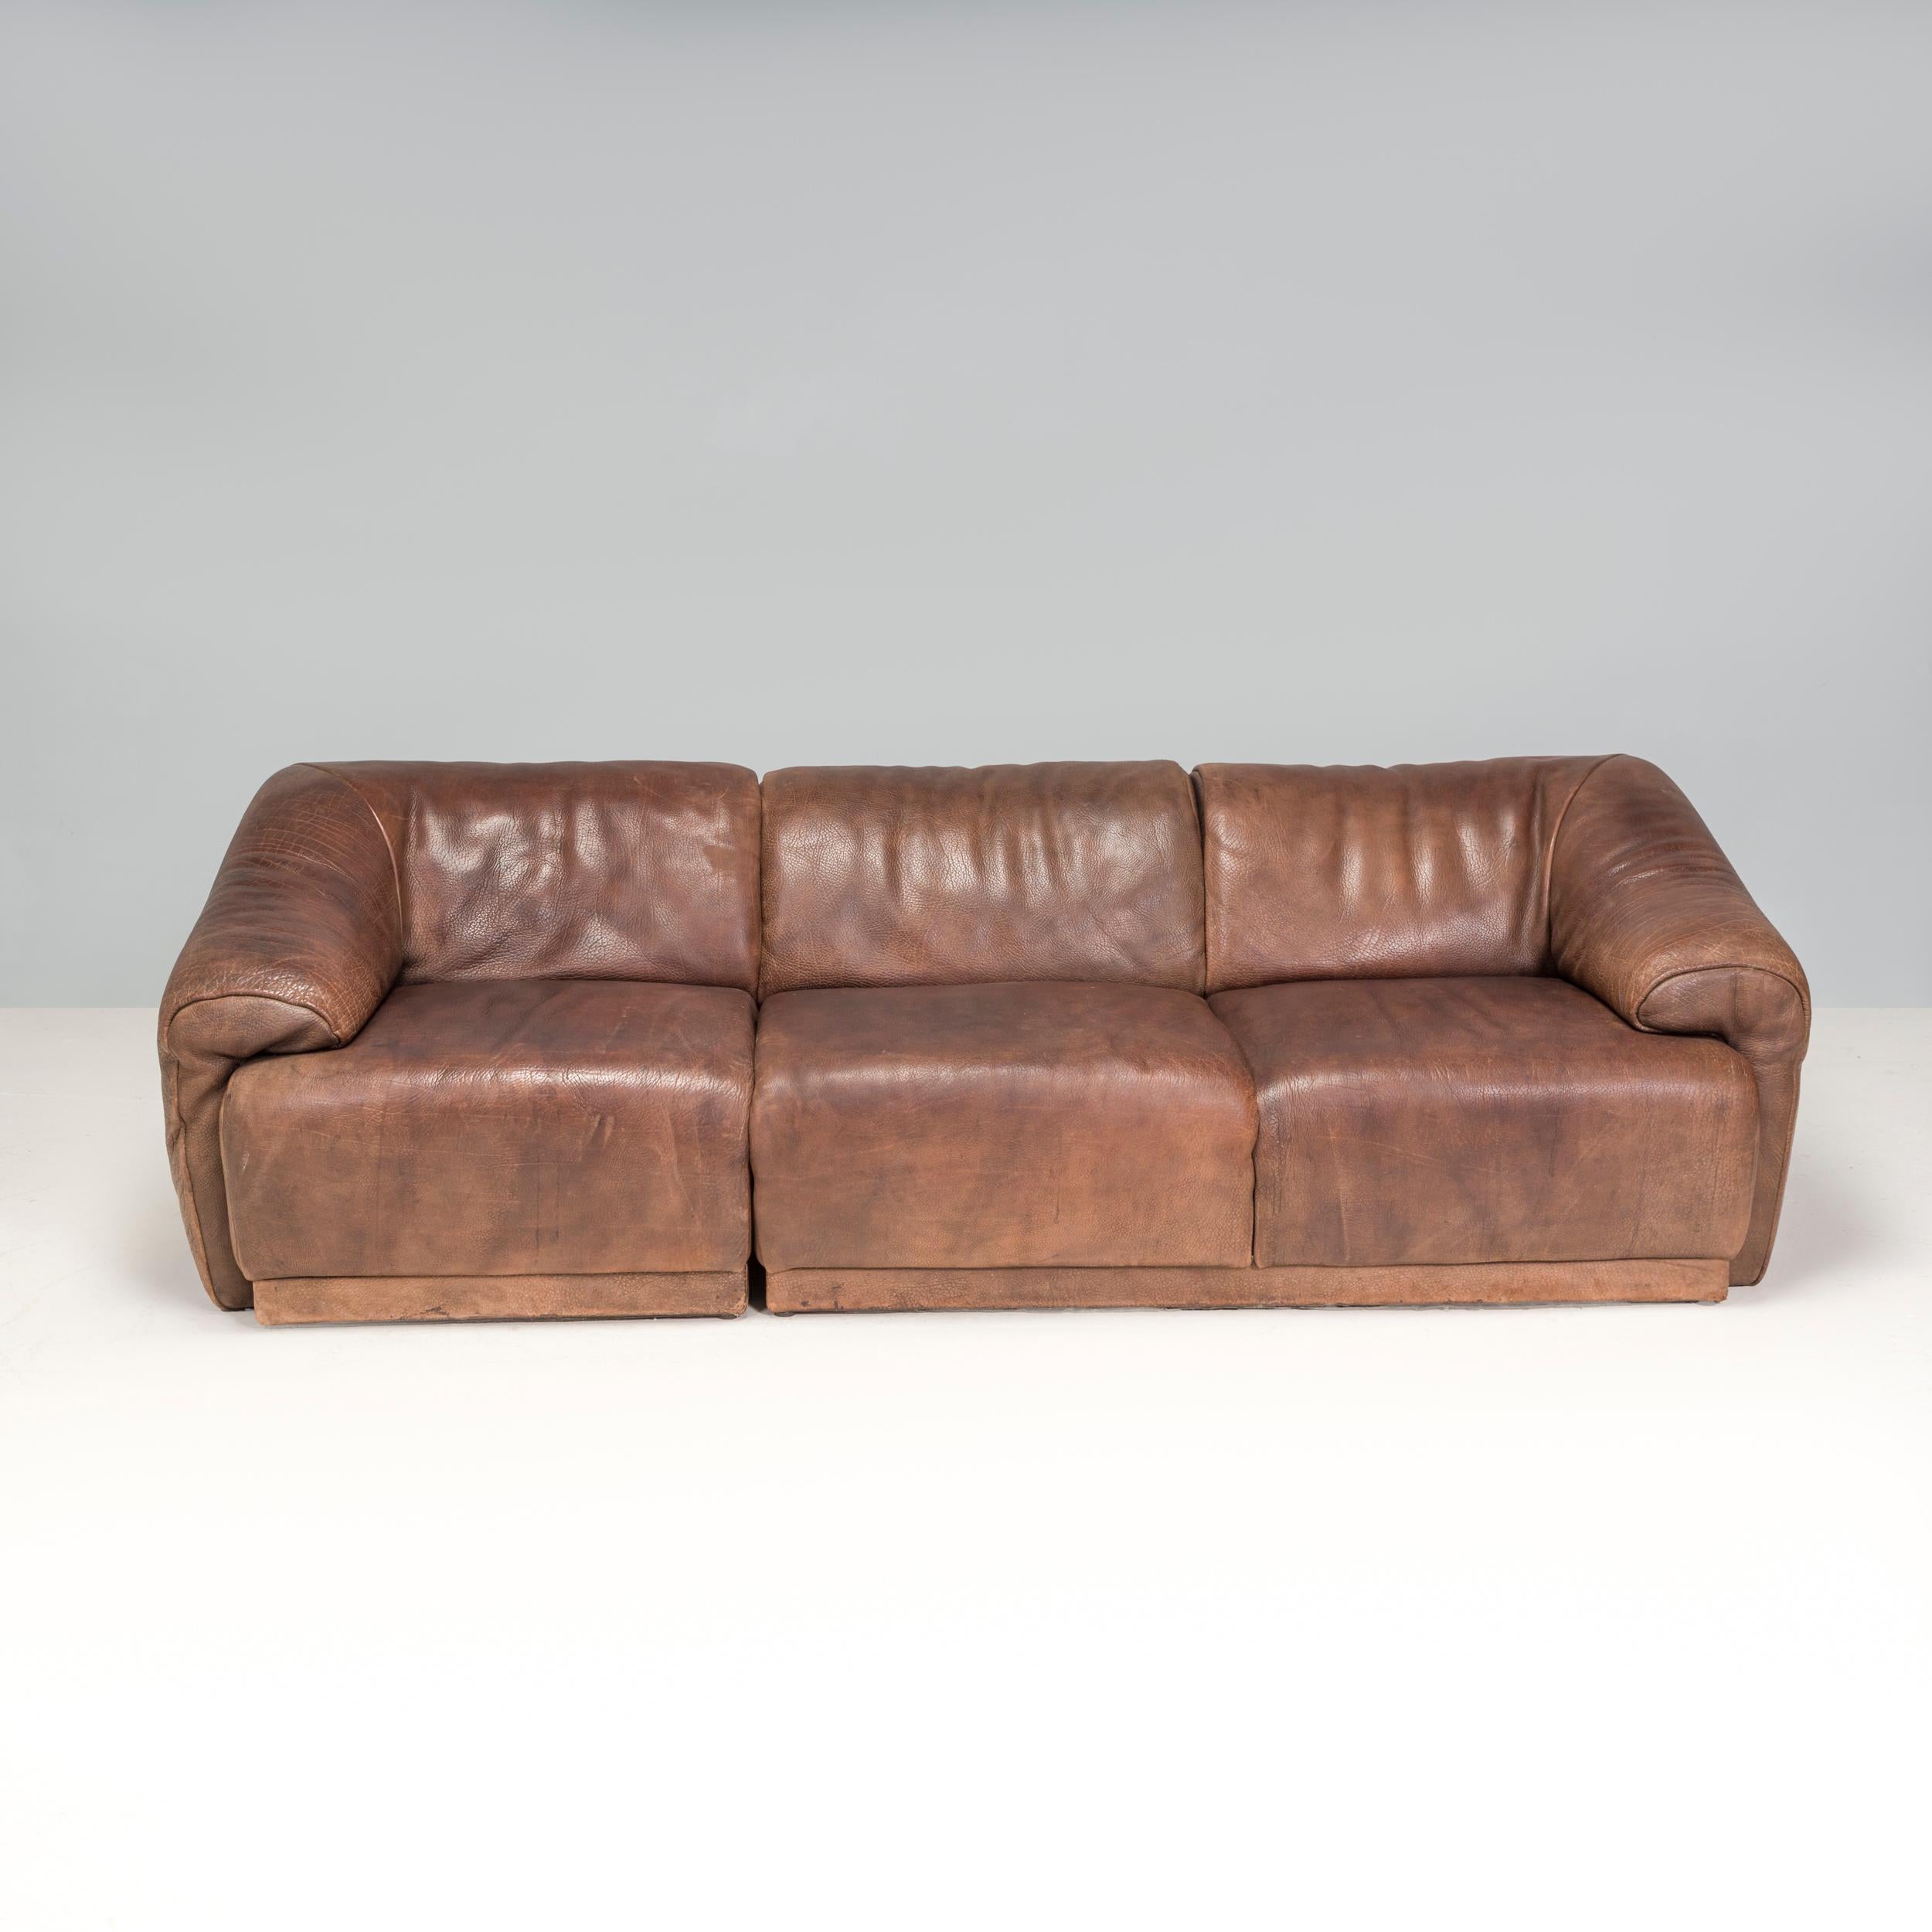 Founded in 1965, the De Sede furniture company has since become best known for their quality leather designs and iconic sofa and armchairs.

Fully upholstered in soft brown buffalo leather, this 1970s sofa has a boxy silhouette in a tuxedo style,